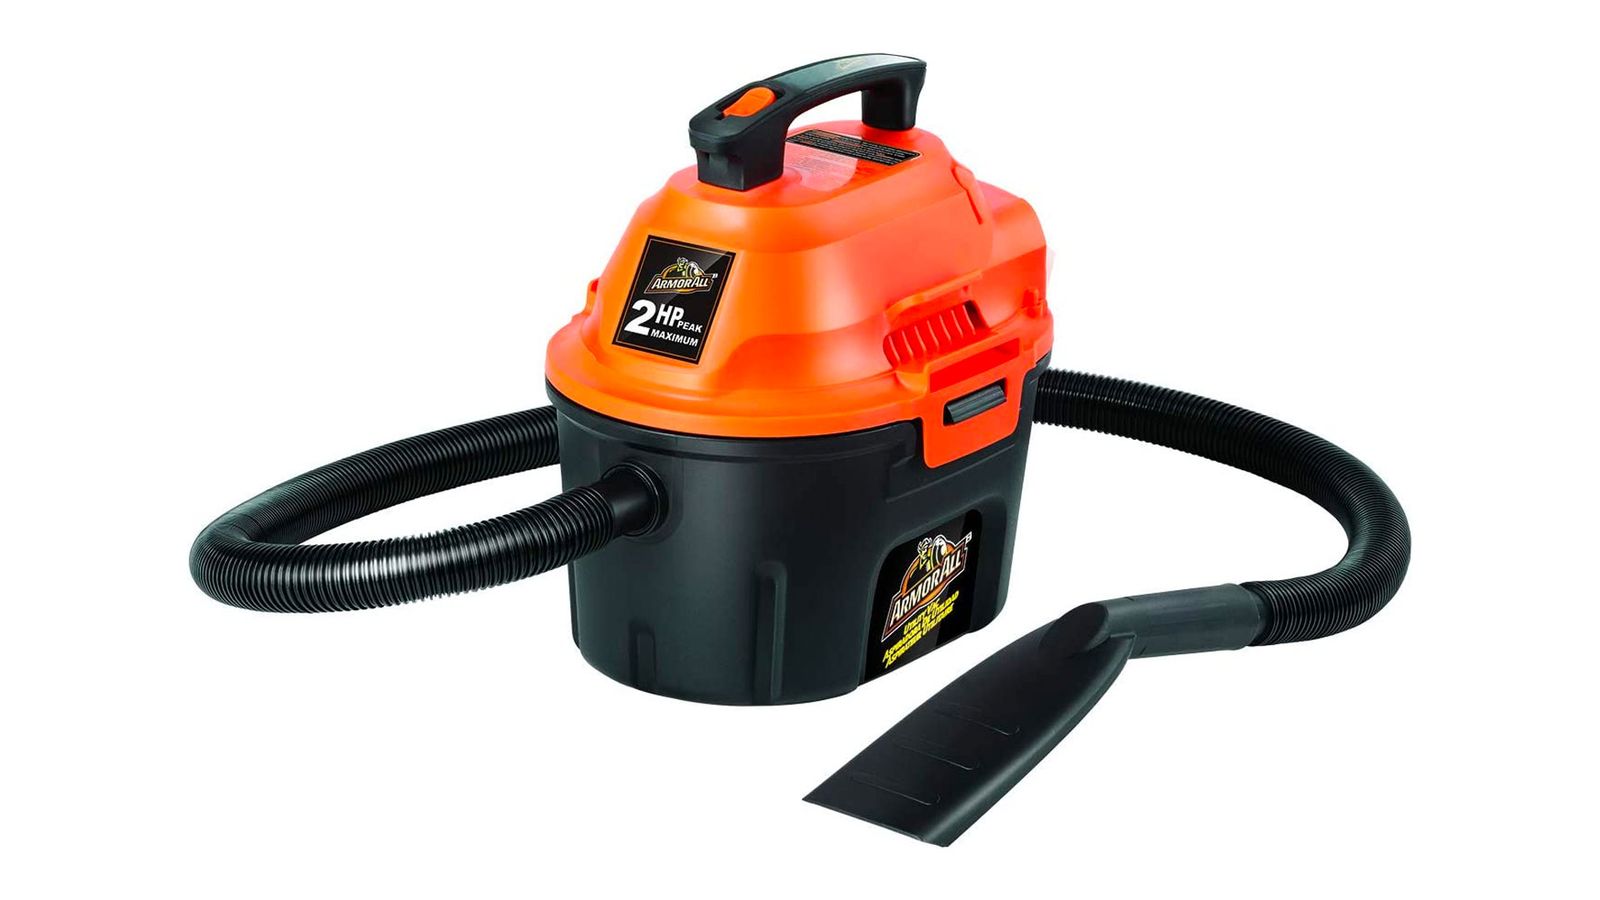 Armor All AA255 product image of an orange and black corded vacuum.